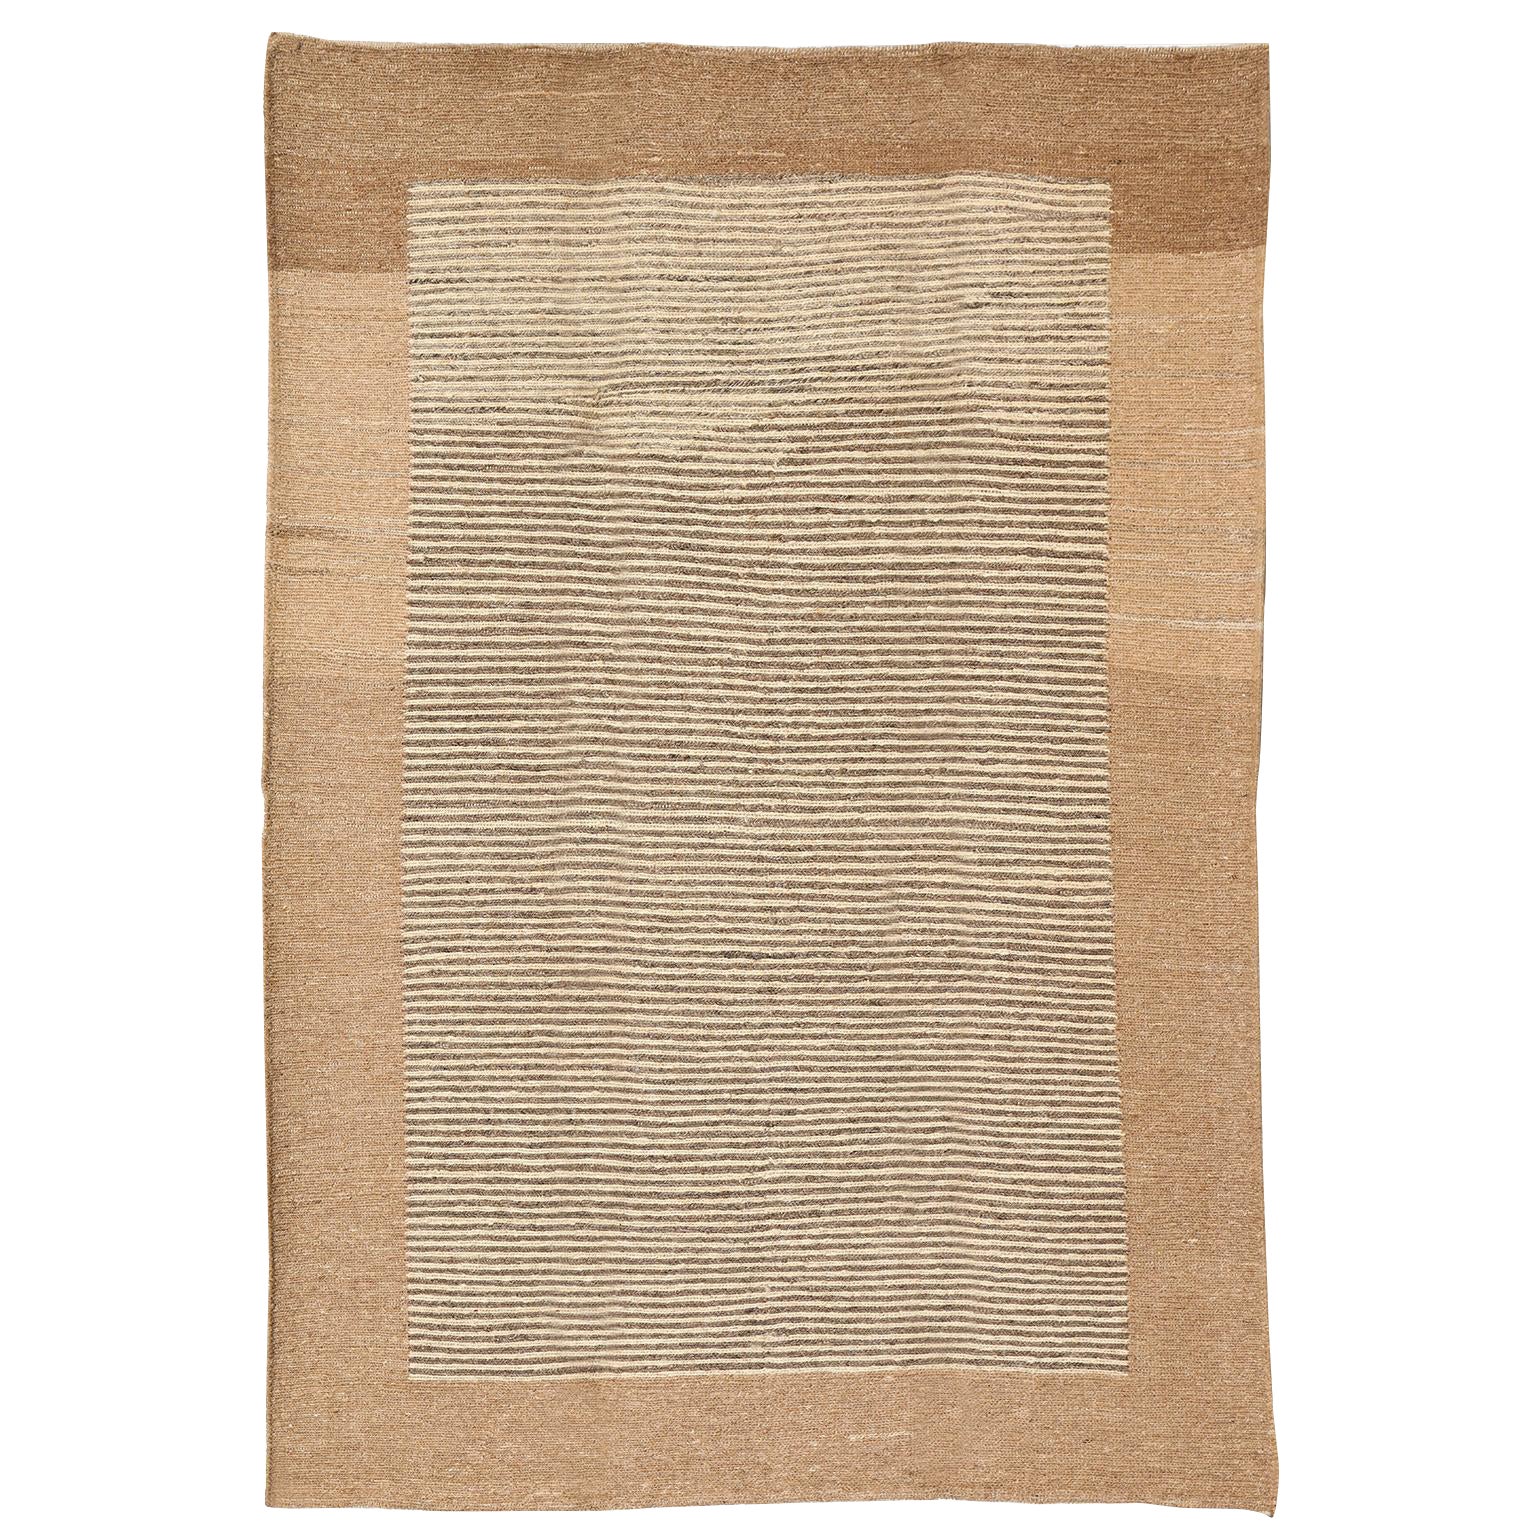 Orley Shabahang "Horizon" Wool Persian Flat-Weave Rug, Neutral, 5' x 7' For Sale